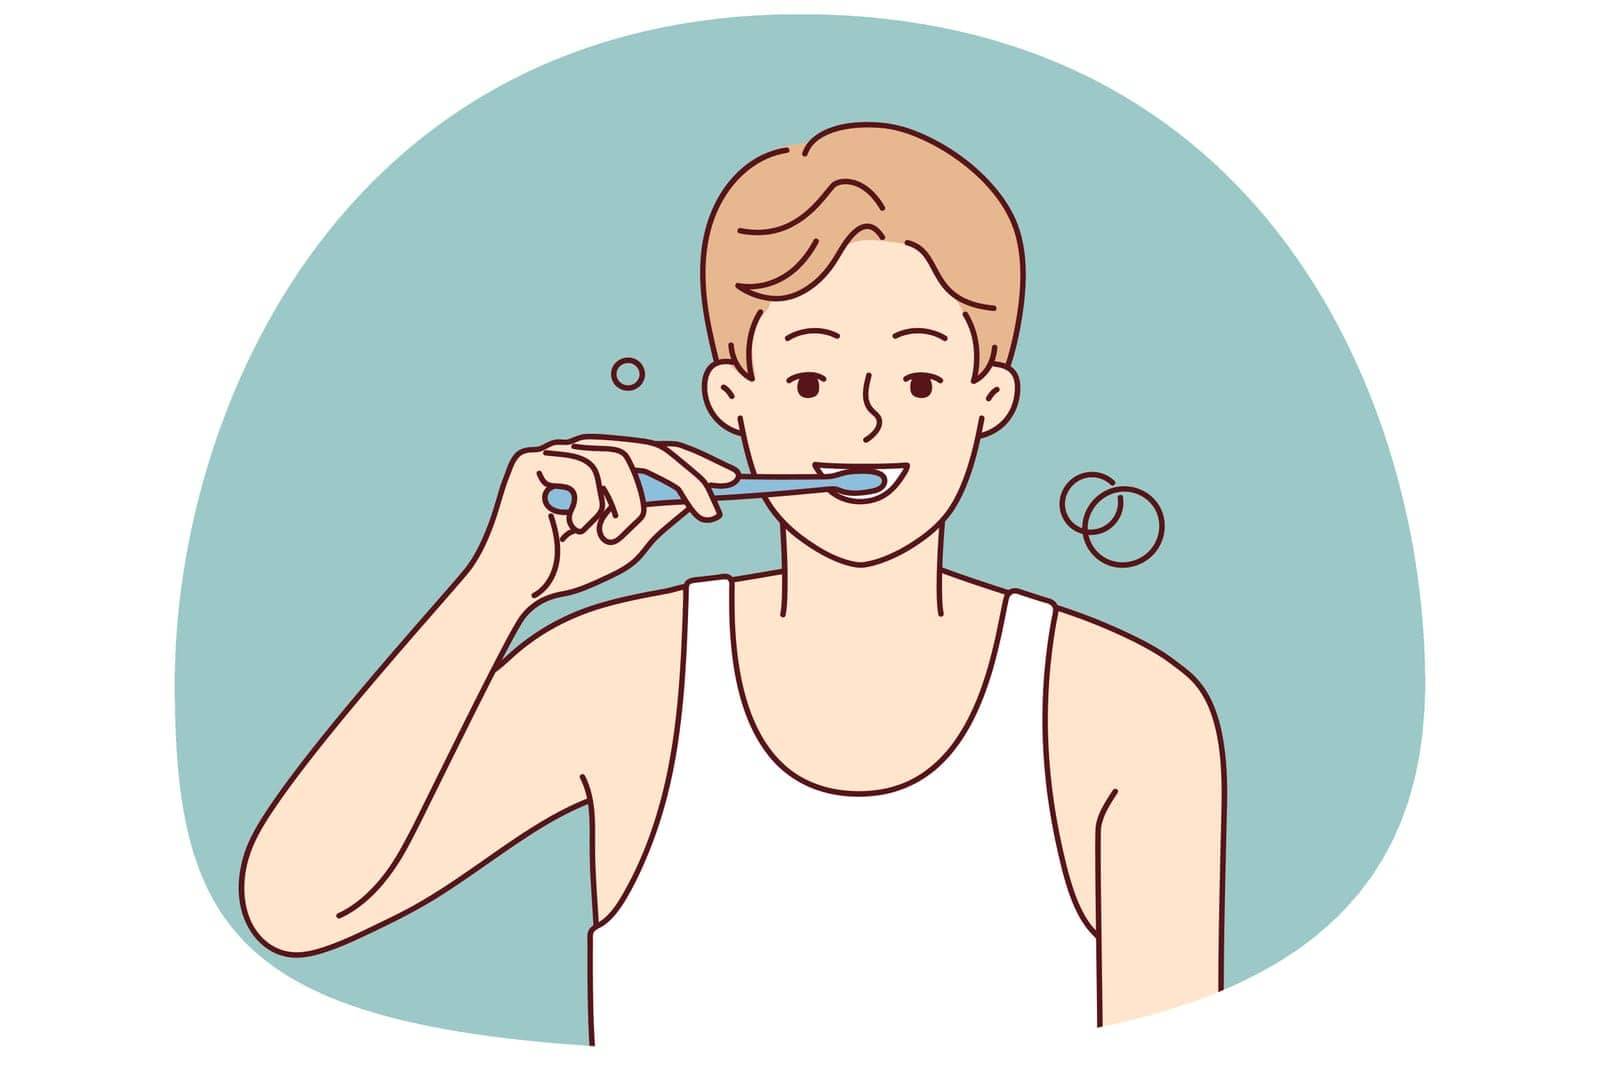 Smiling young man brushing teeth with toothbrush in morning. Happy guy do oral care daily routine in bathroom. Good habit. Vector illustration.